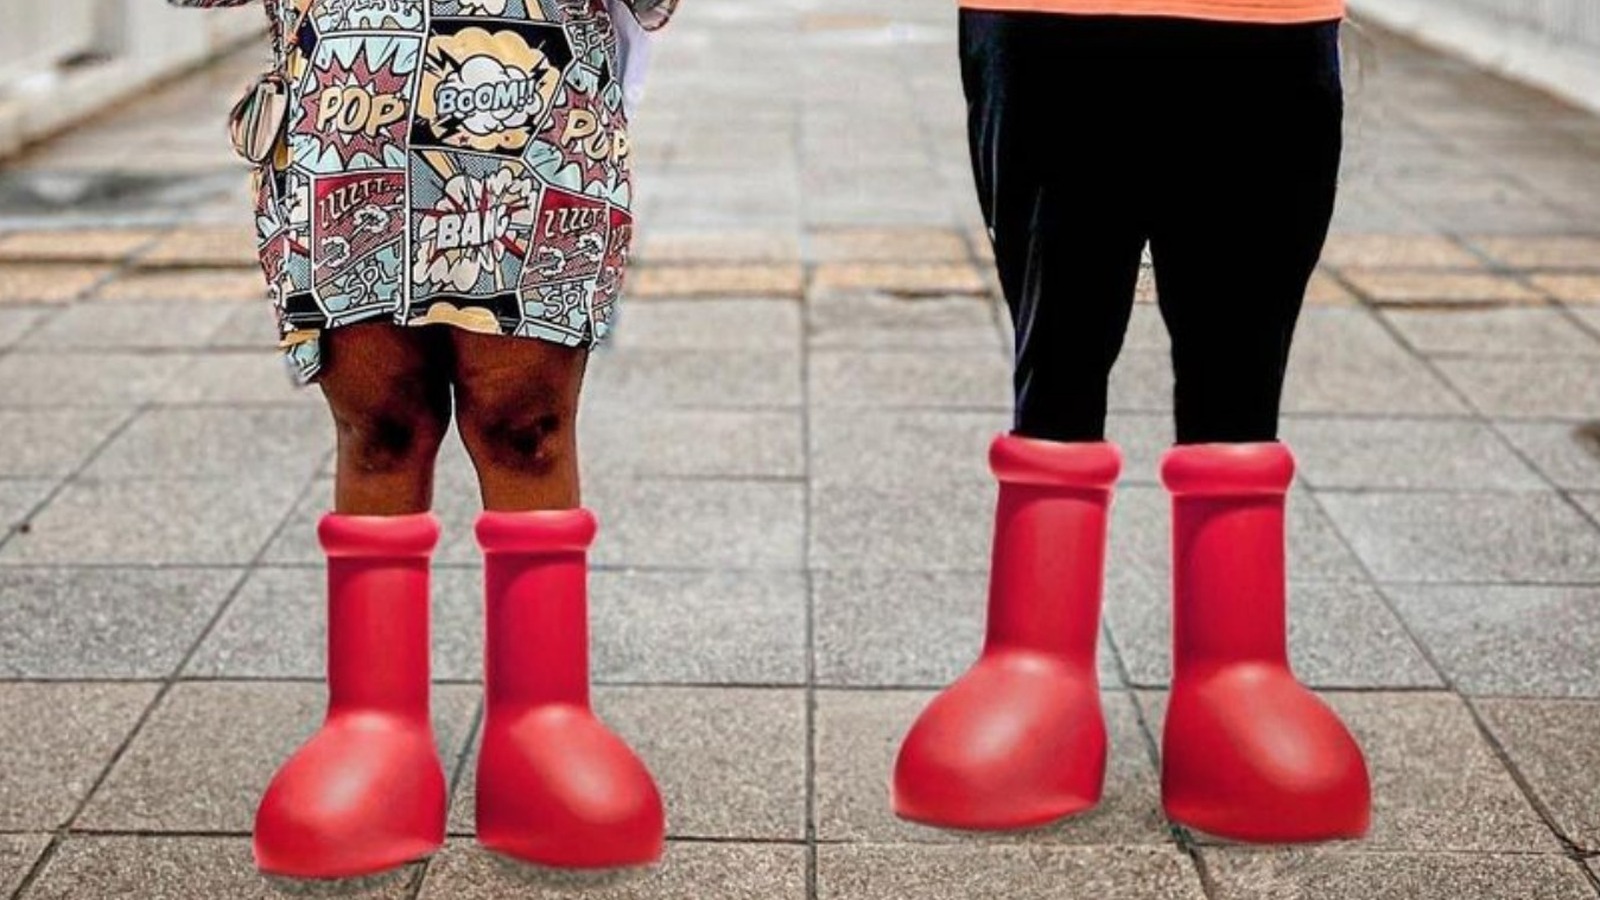 These Big Red Objects From MSCHF Claim to Be Boots - The New York Times